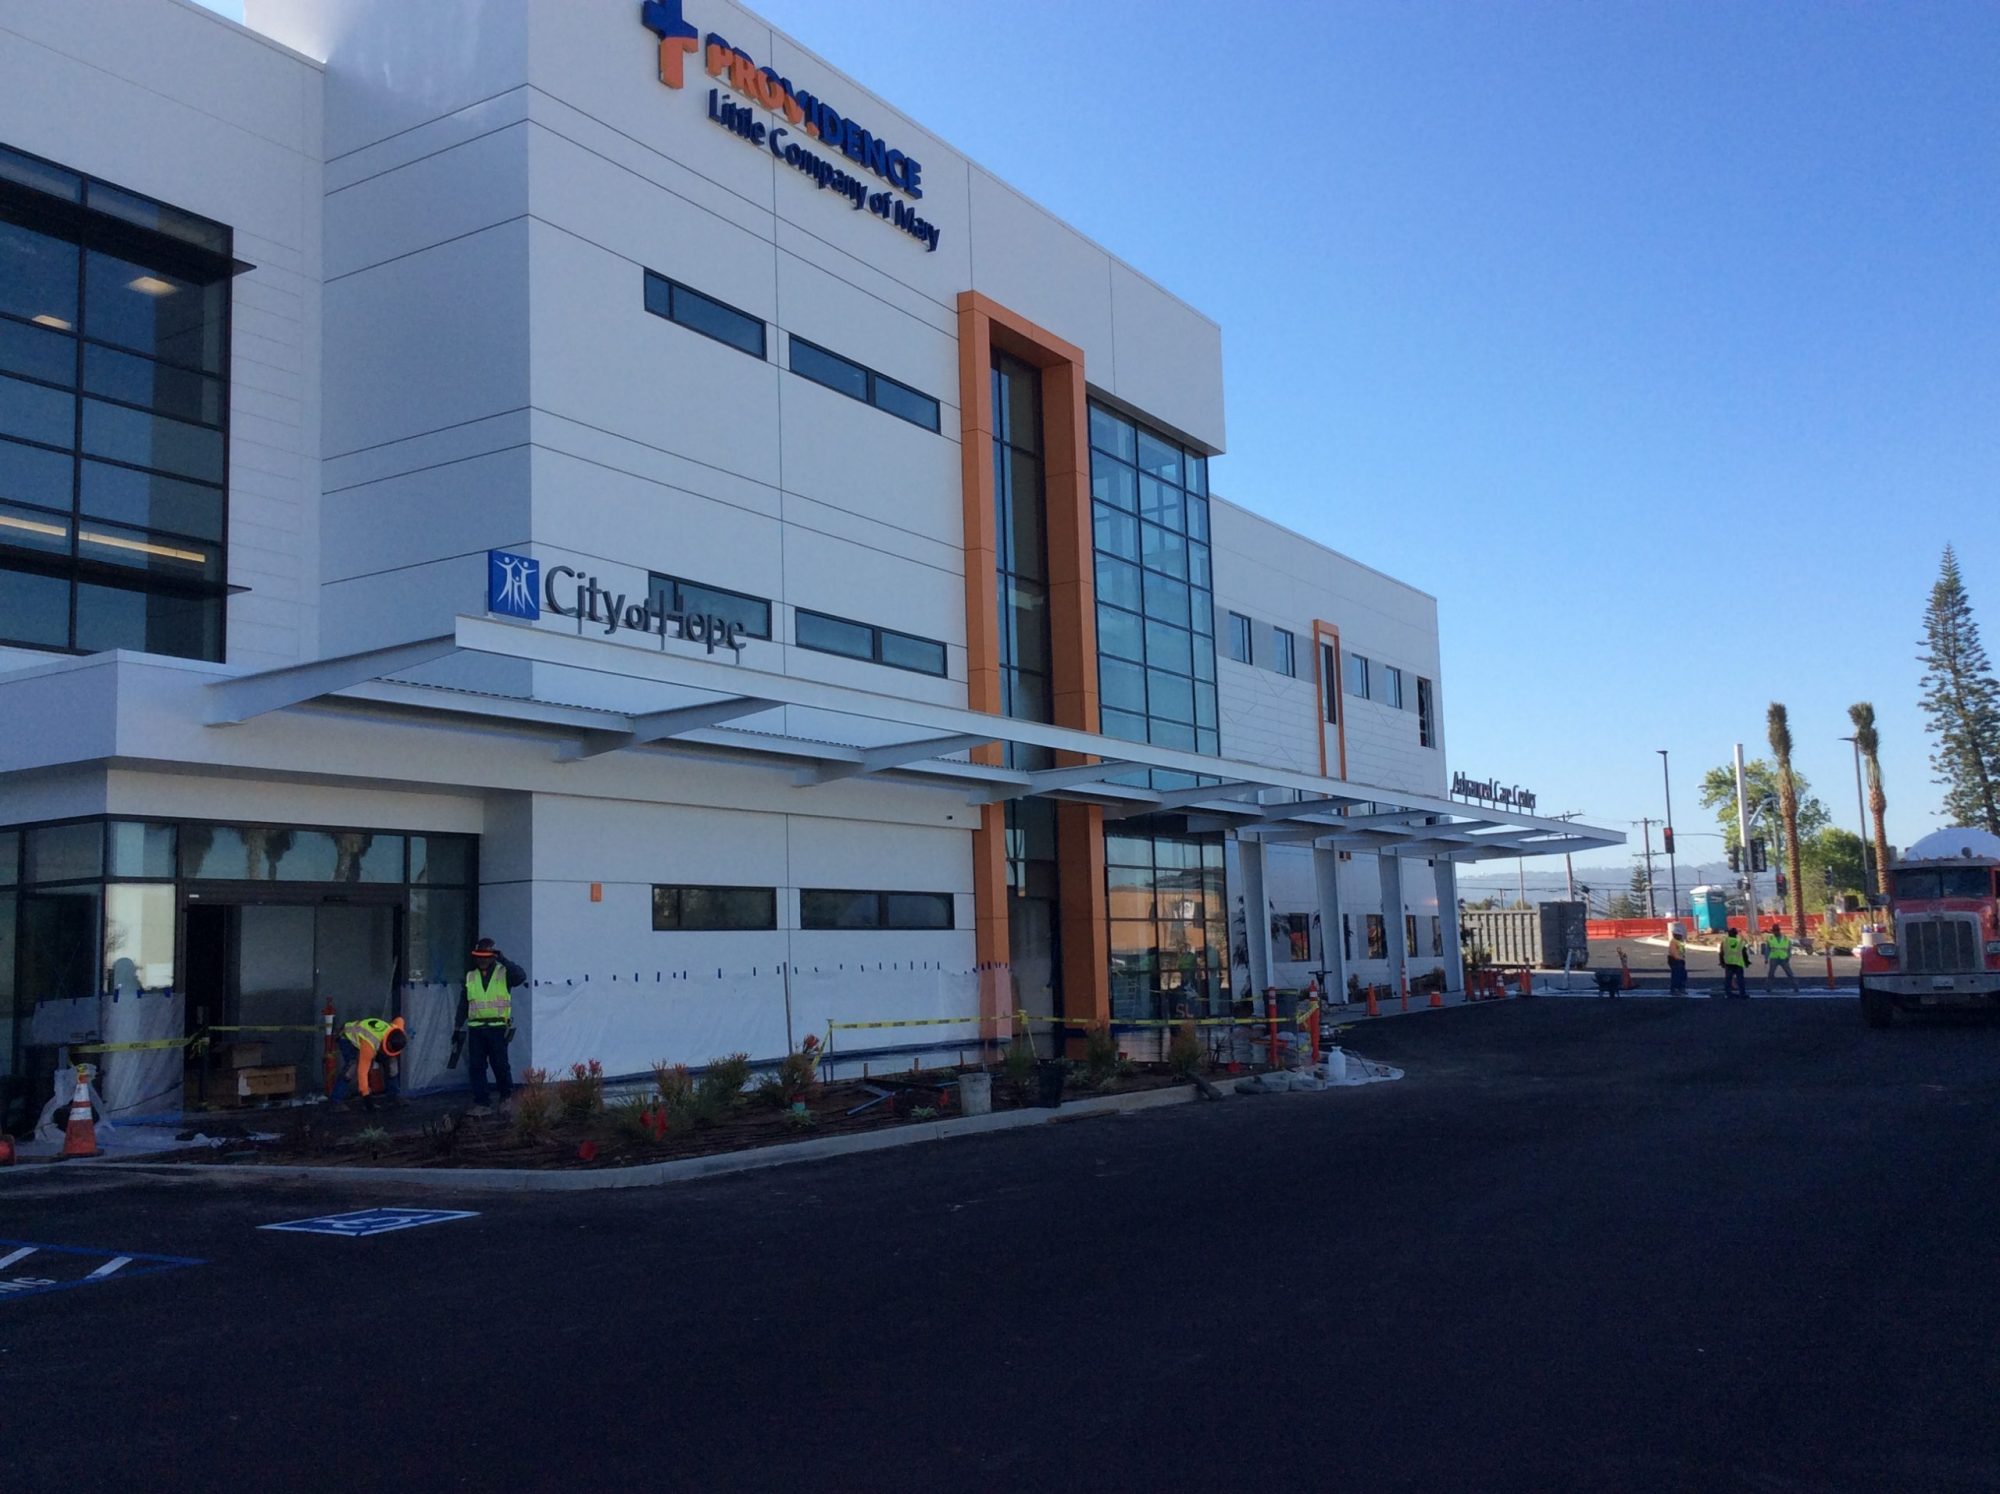 South Bay Secures Much Needed Oncology Services With New Providence Advanced Care Center